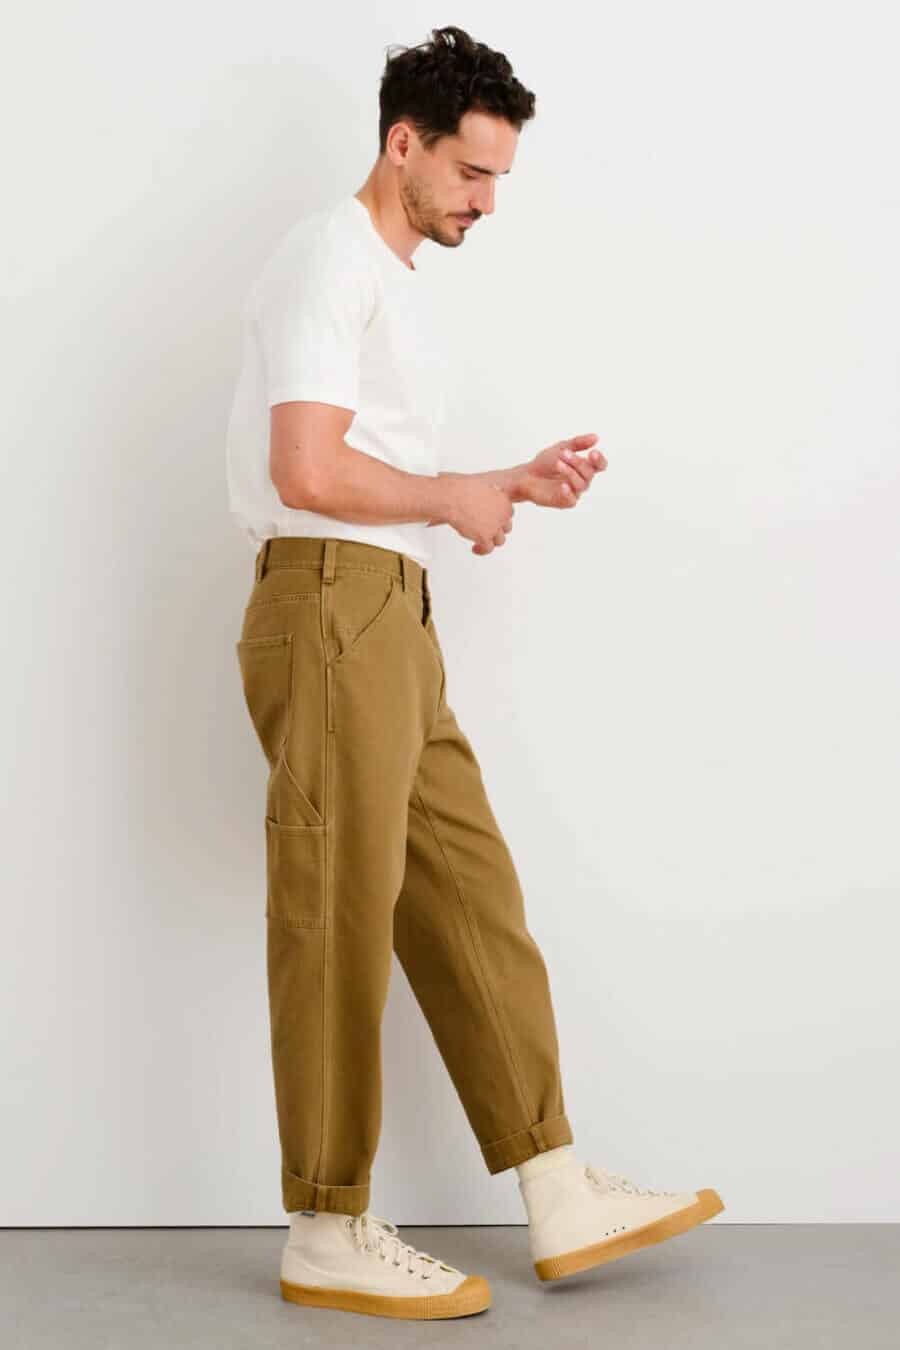 Men's worker pants trend outfit